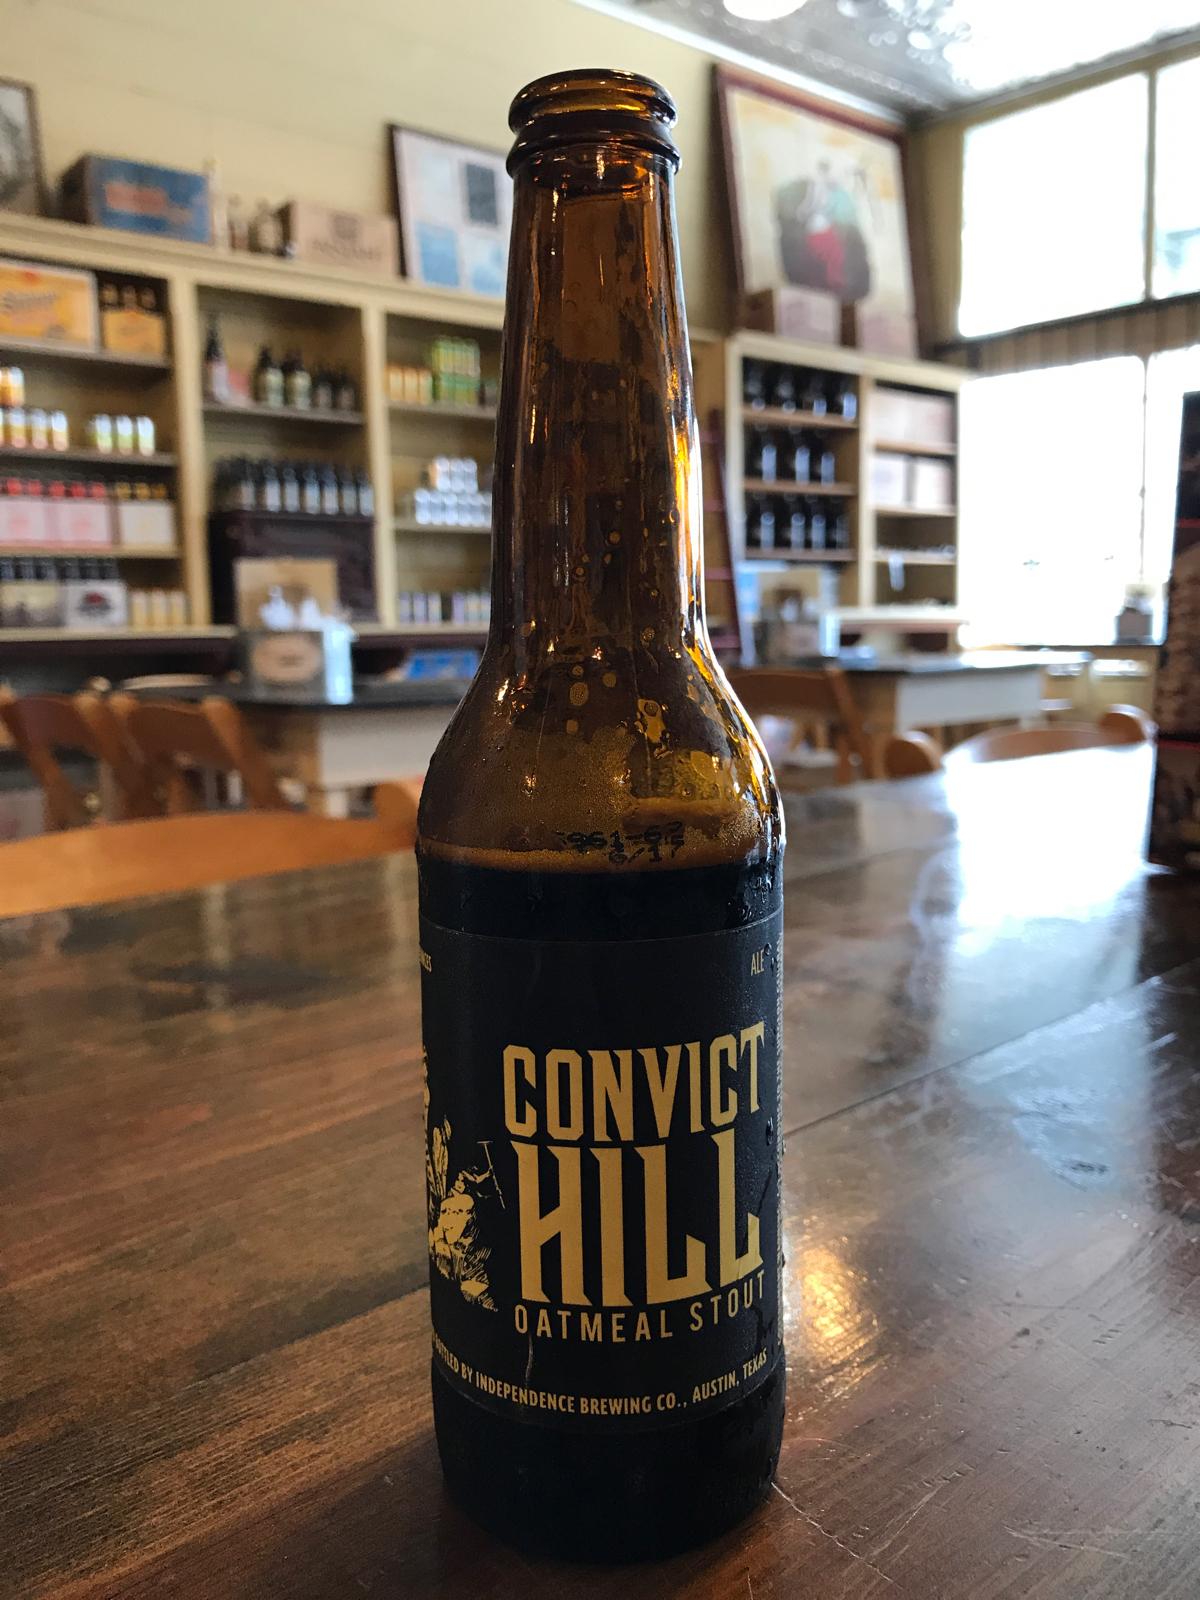 Convict Hill Oatmeal Stout